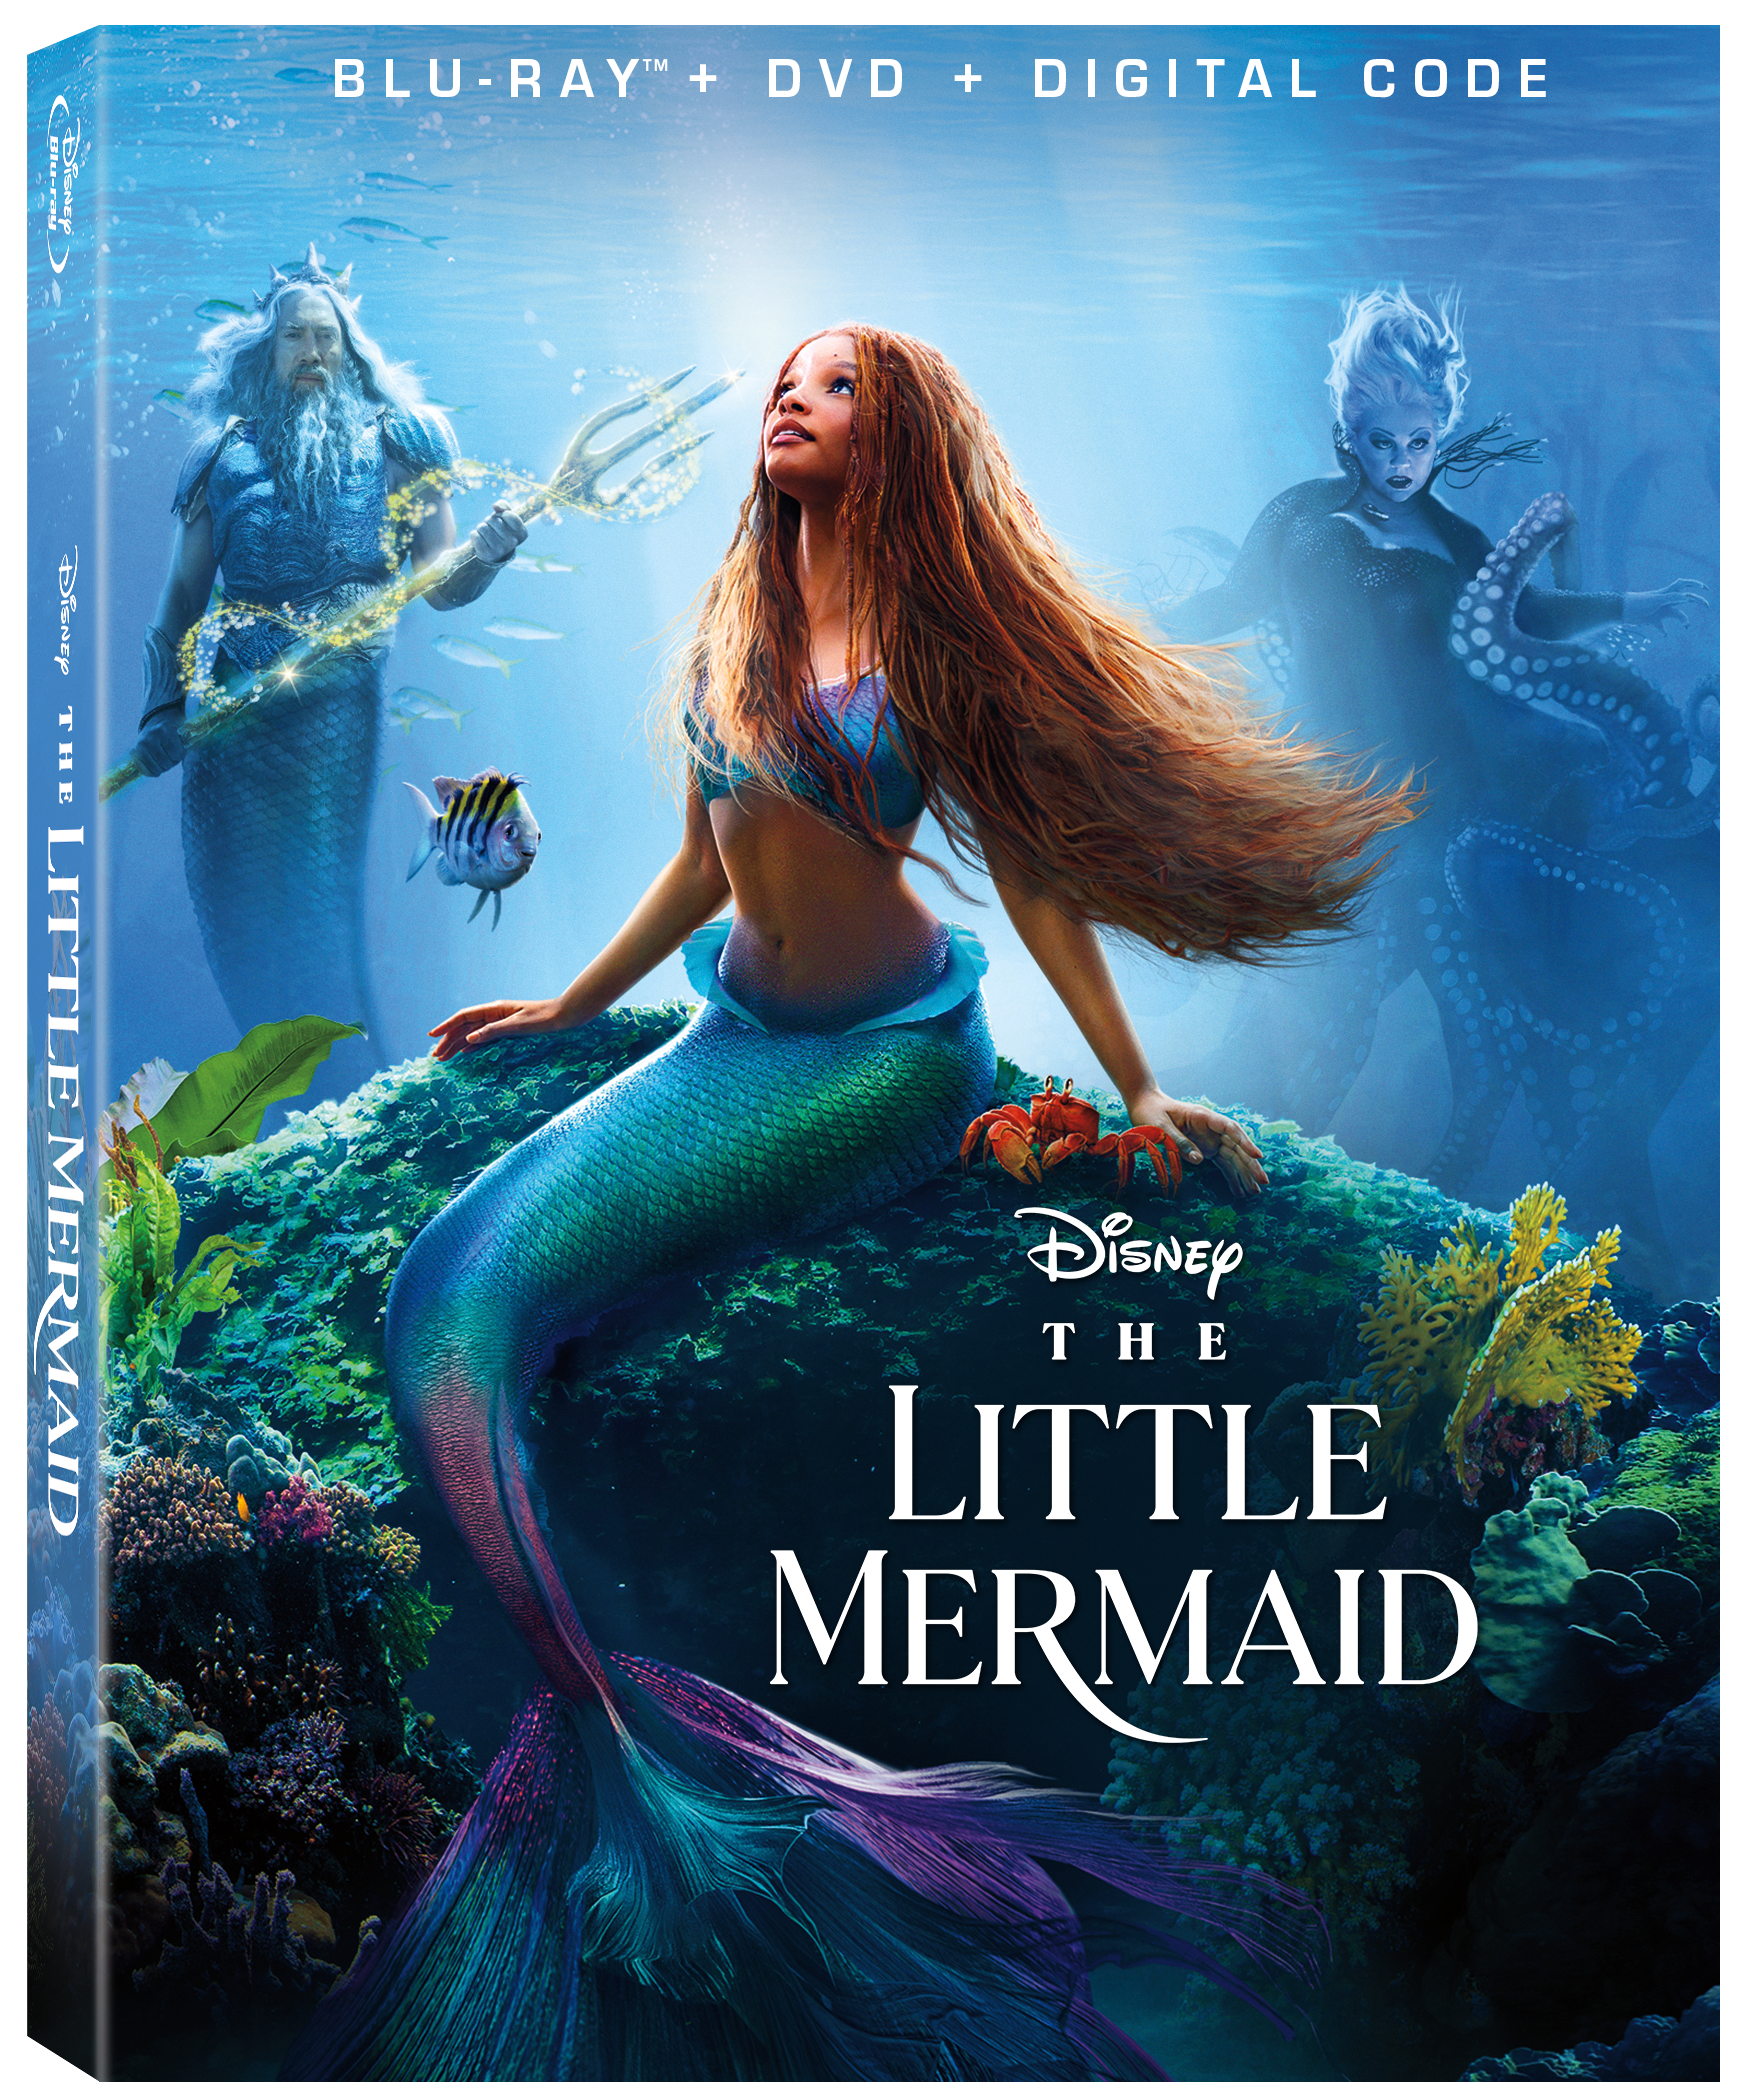 Disney's The Little Mermaid Live Action Movie Review – Geek Mamas